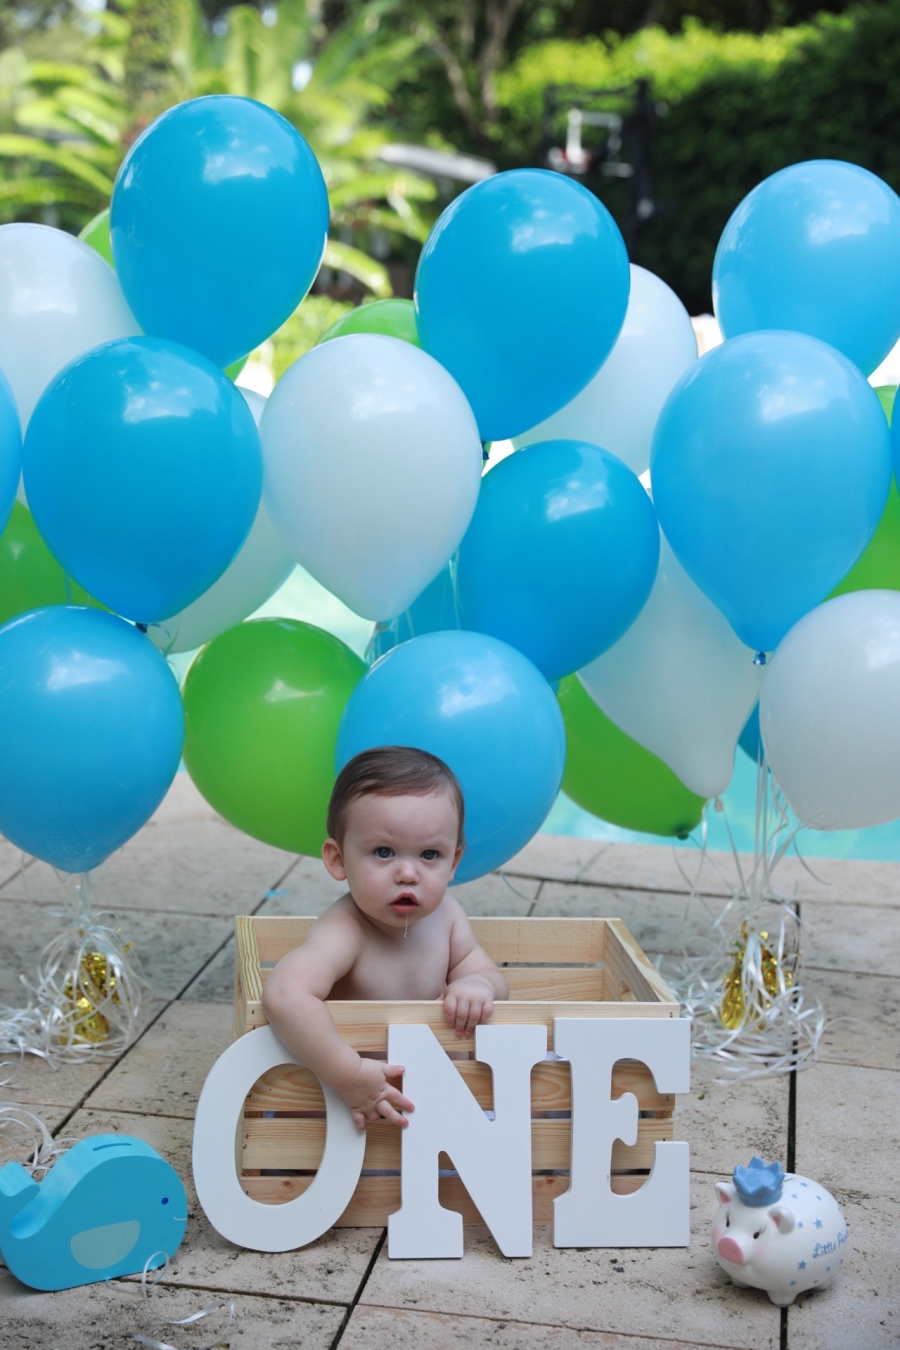 Birthday Photoshoot Ideas At Home For Toddlers